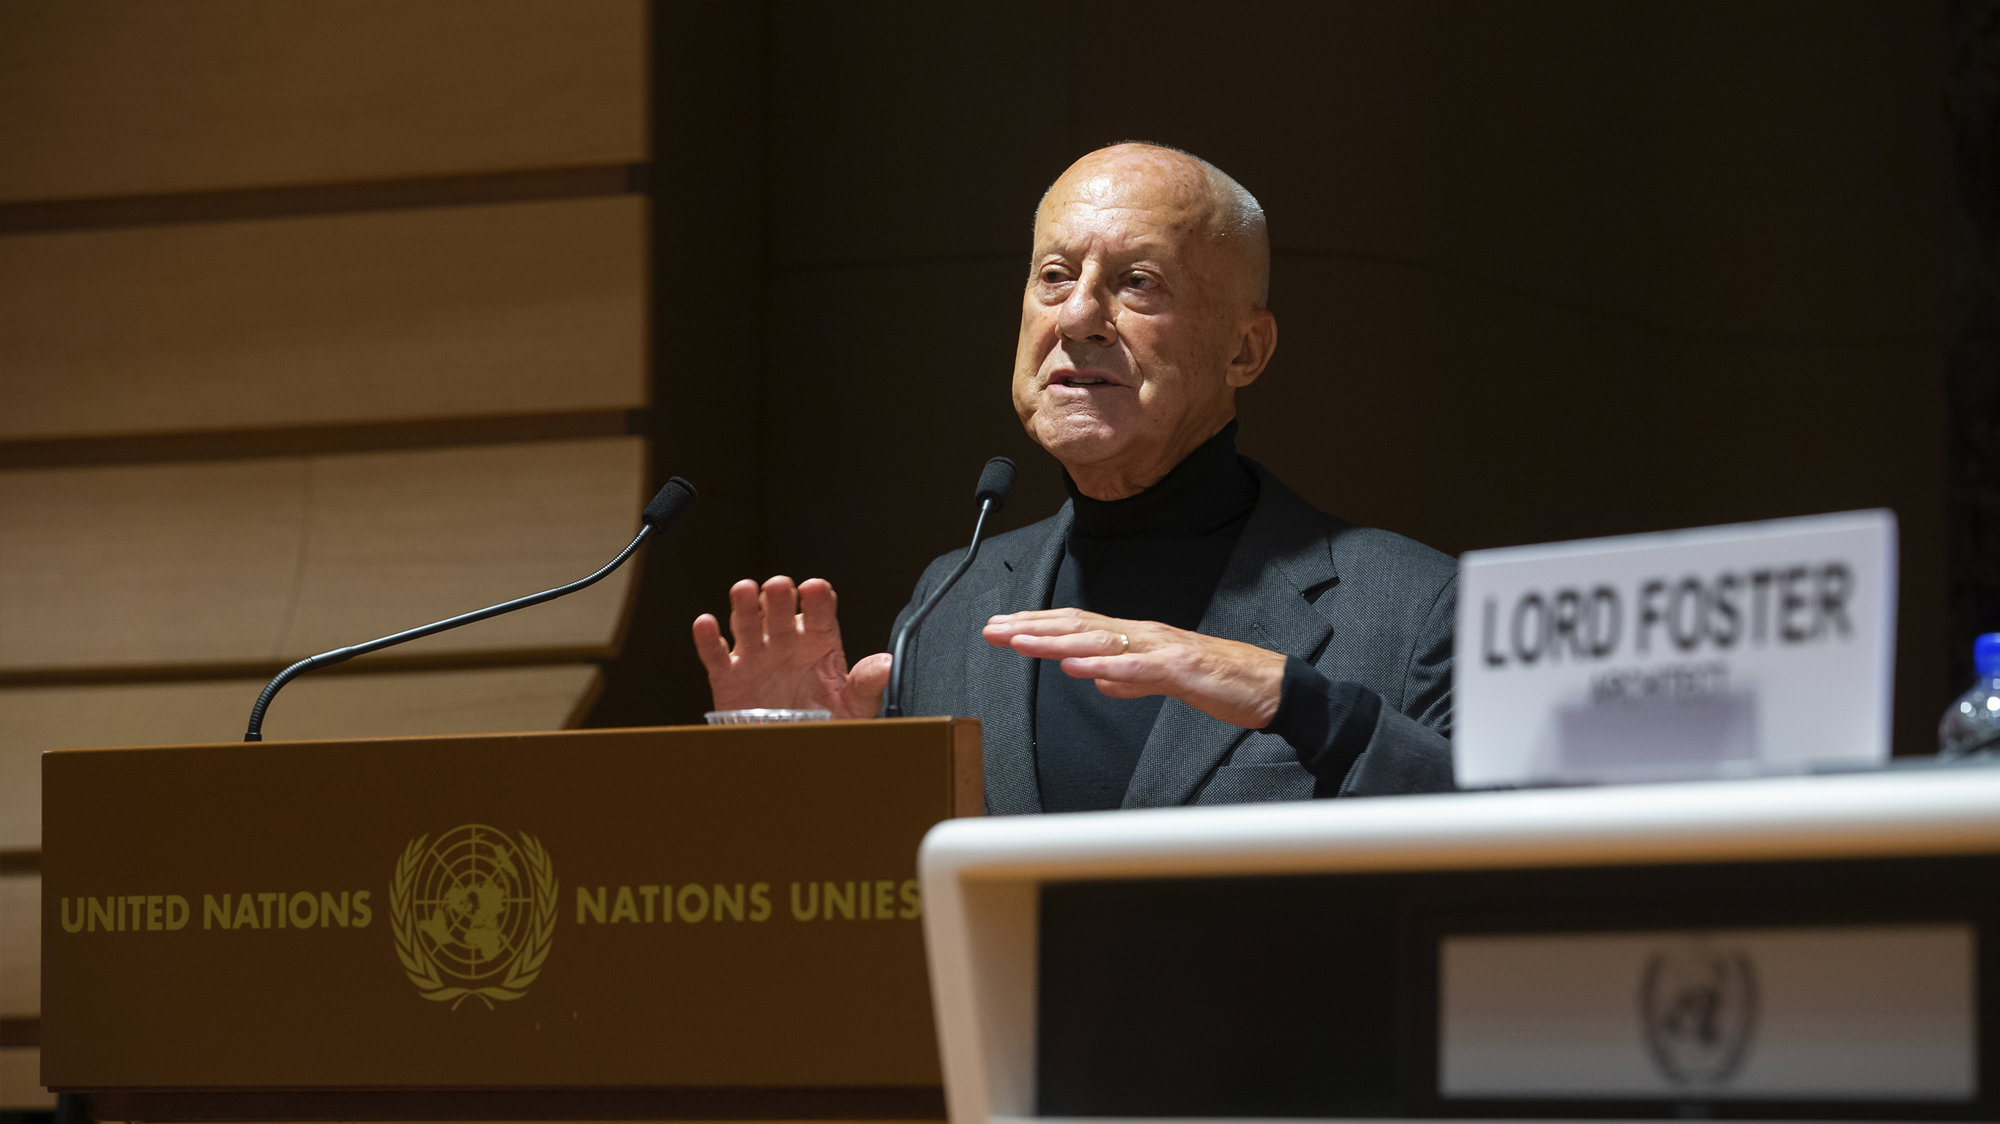 Norman Foster Addresses The First United Nations Forum Of Mayors In Geneva